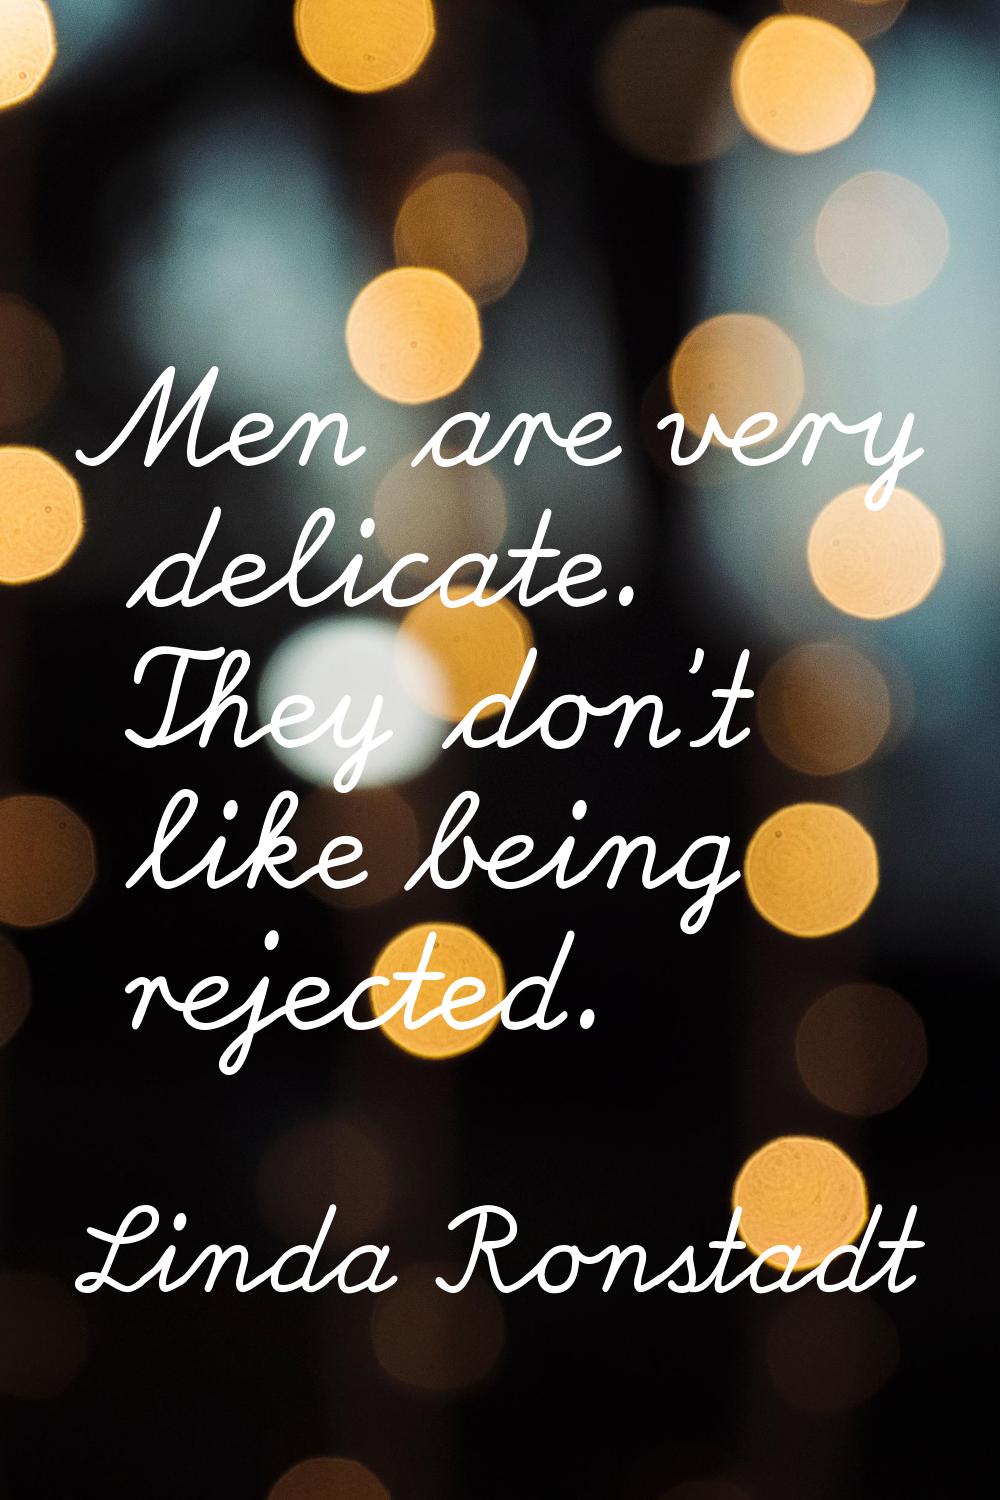 Men are very delicate. They don't like being rejected.